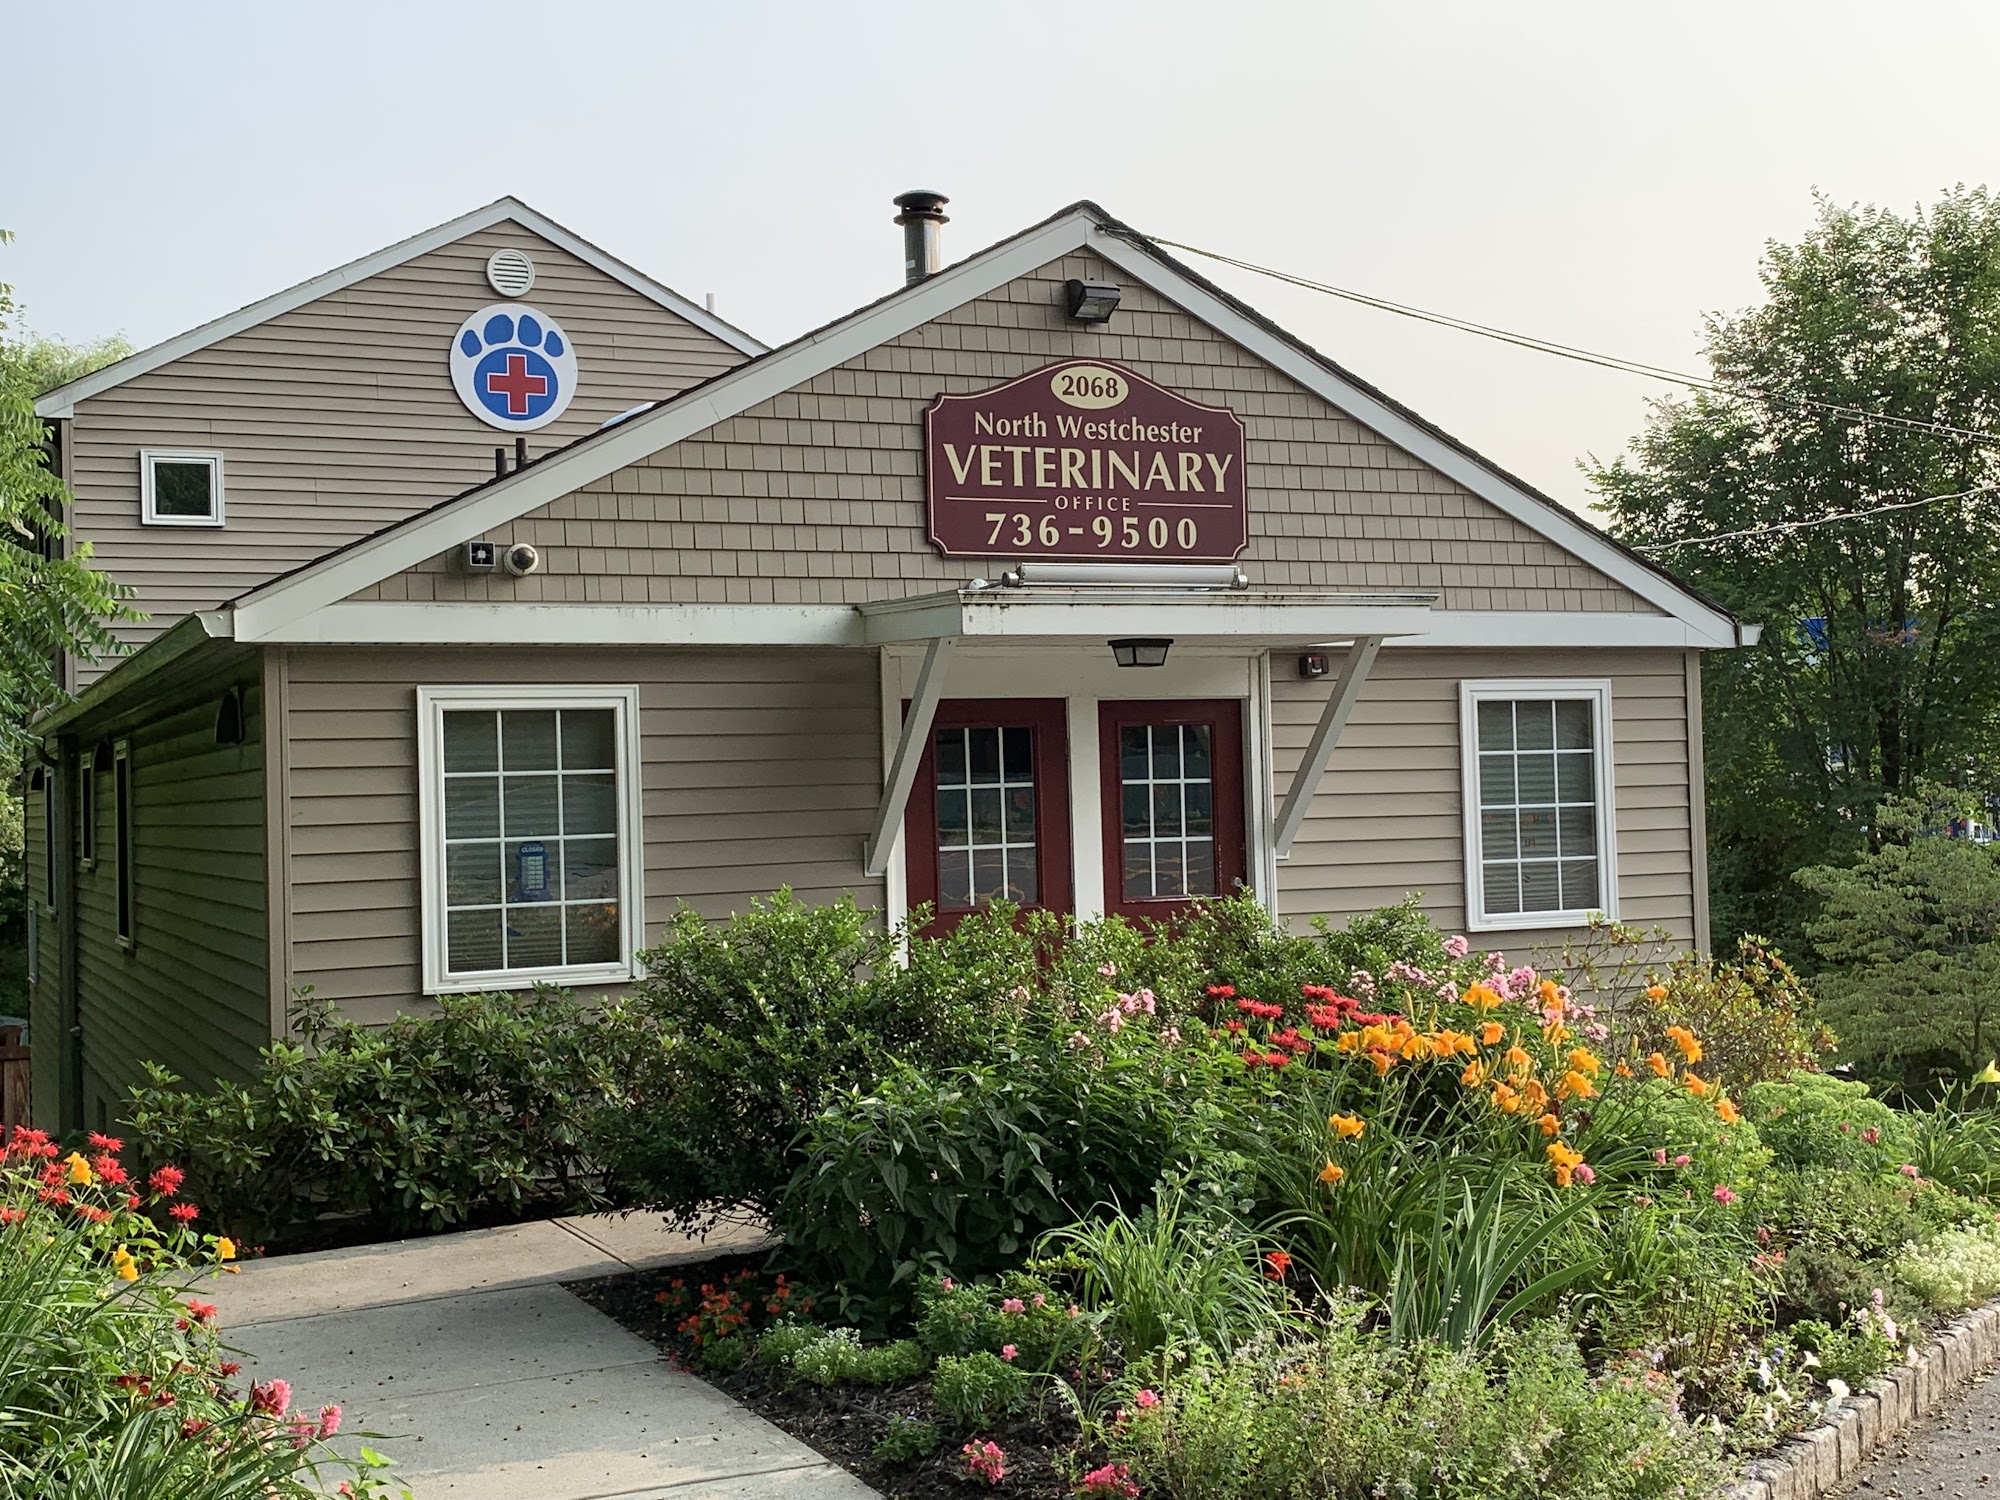 North Westchester Veterinary Office